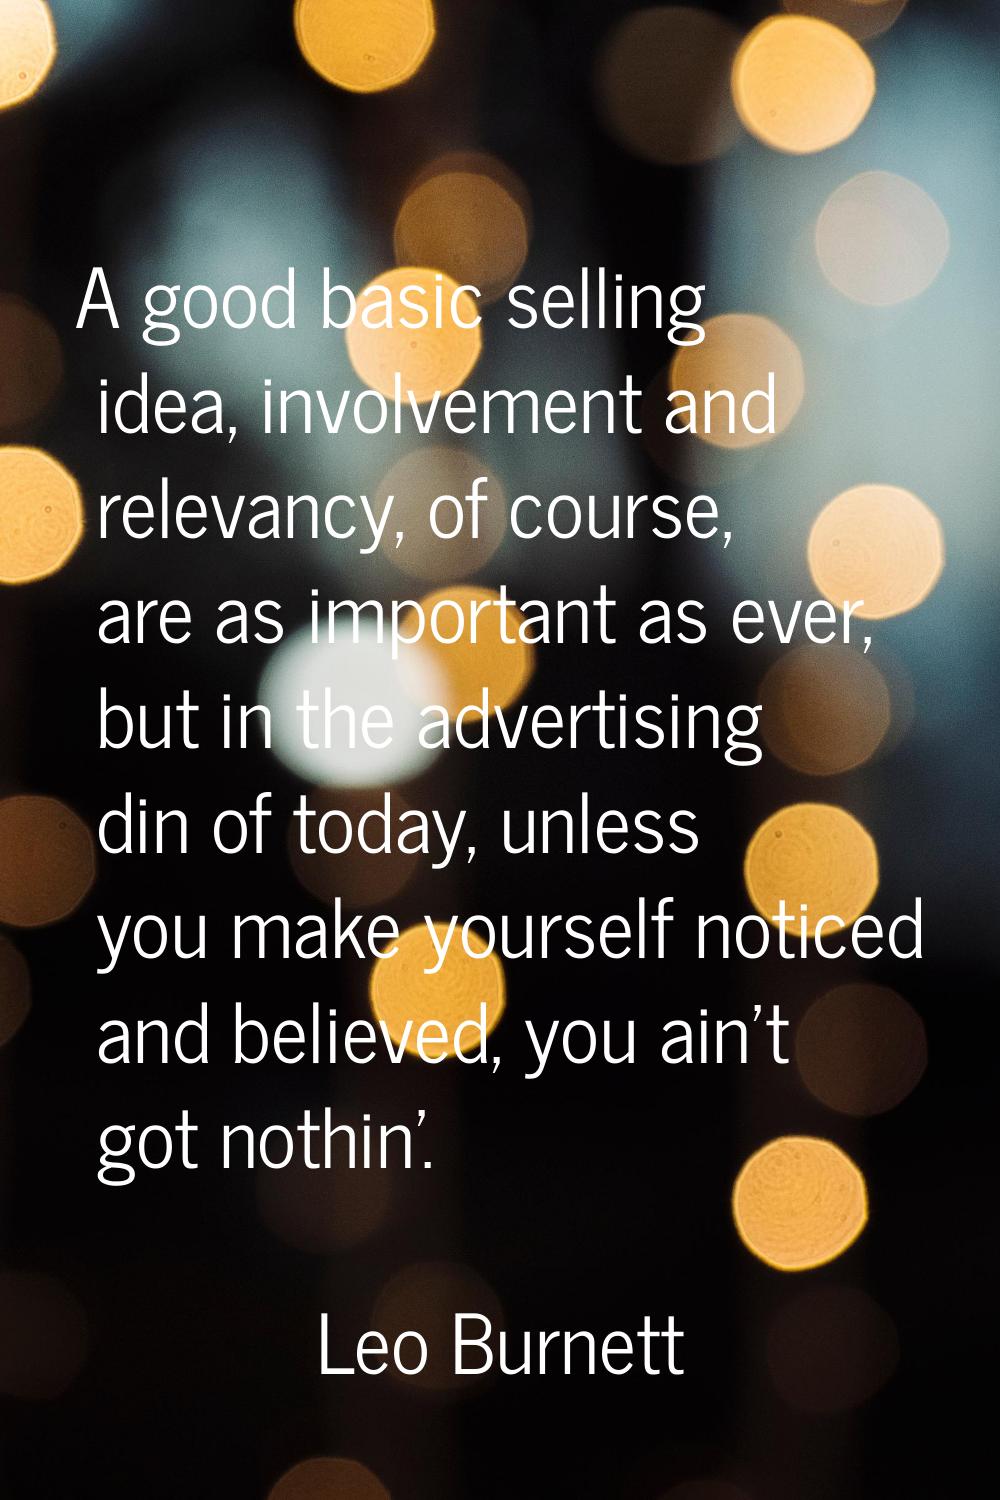 A good basic selling idea, involvement and relevancy, of course, are as important as ever, but in t